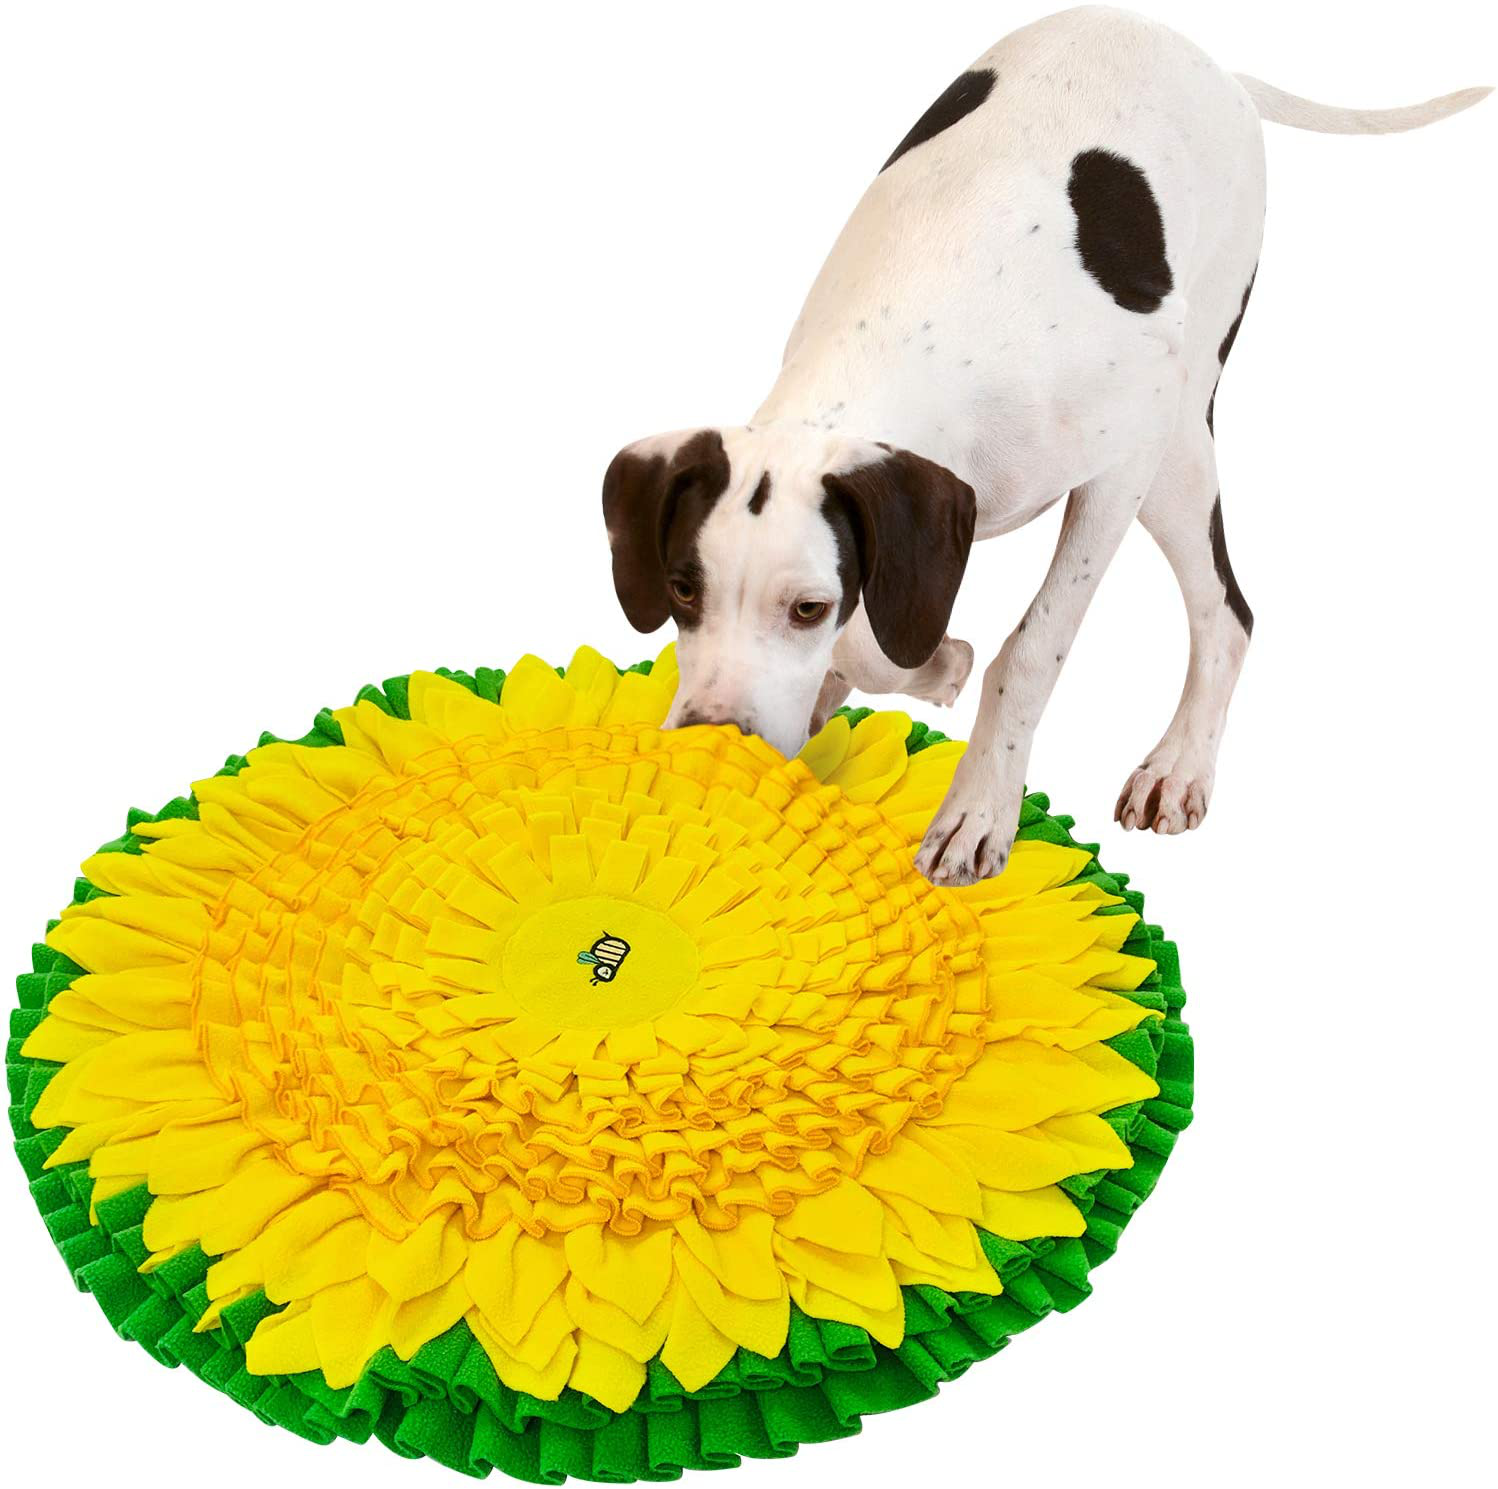 Pet Snuffle Mat For Dogs, Interactive Dog Puzzle Feeding Toy, Slow